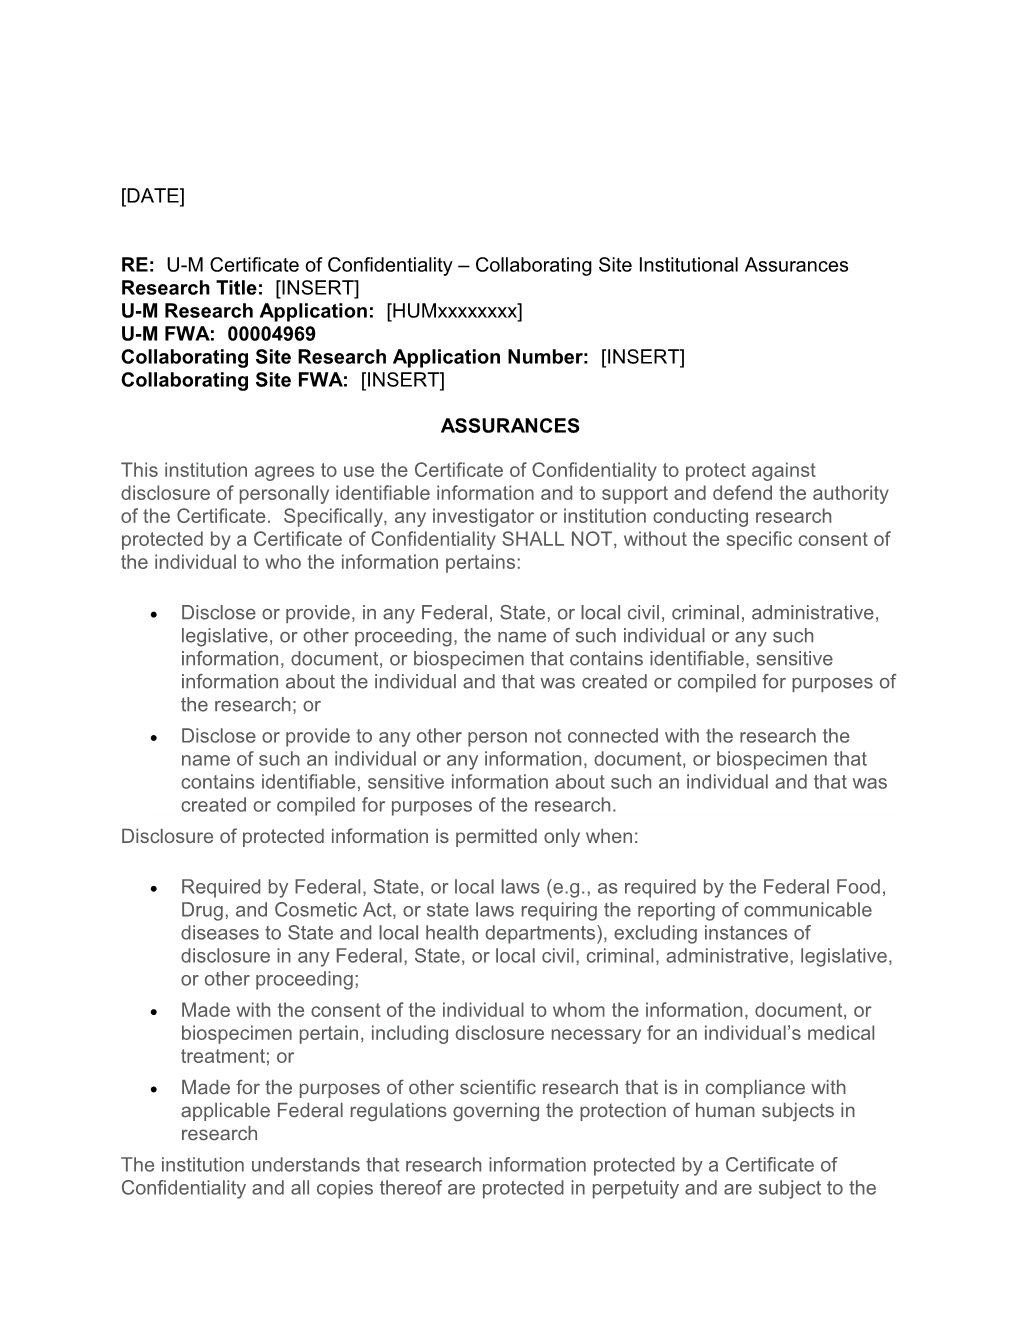 RE: U-M Certificate of Confidentiality Collaborating Site Institutional Assurances